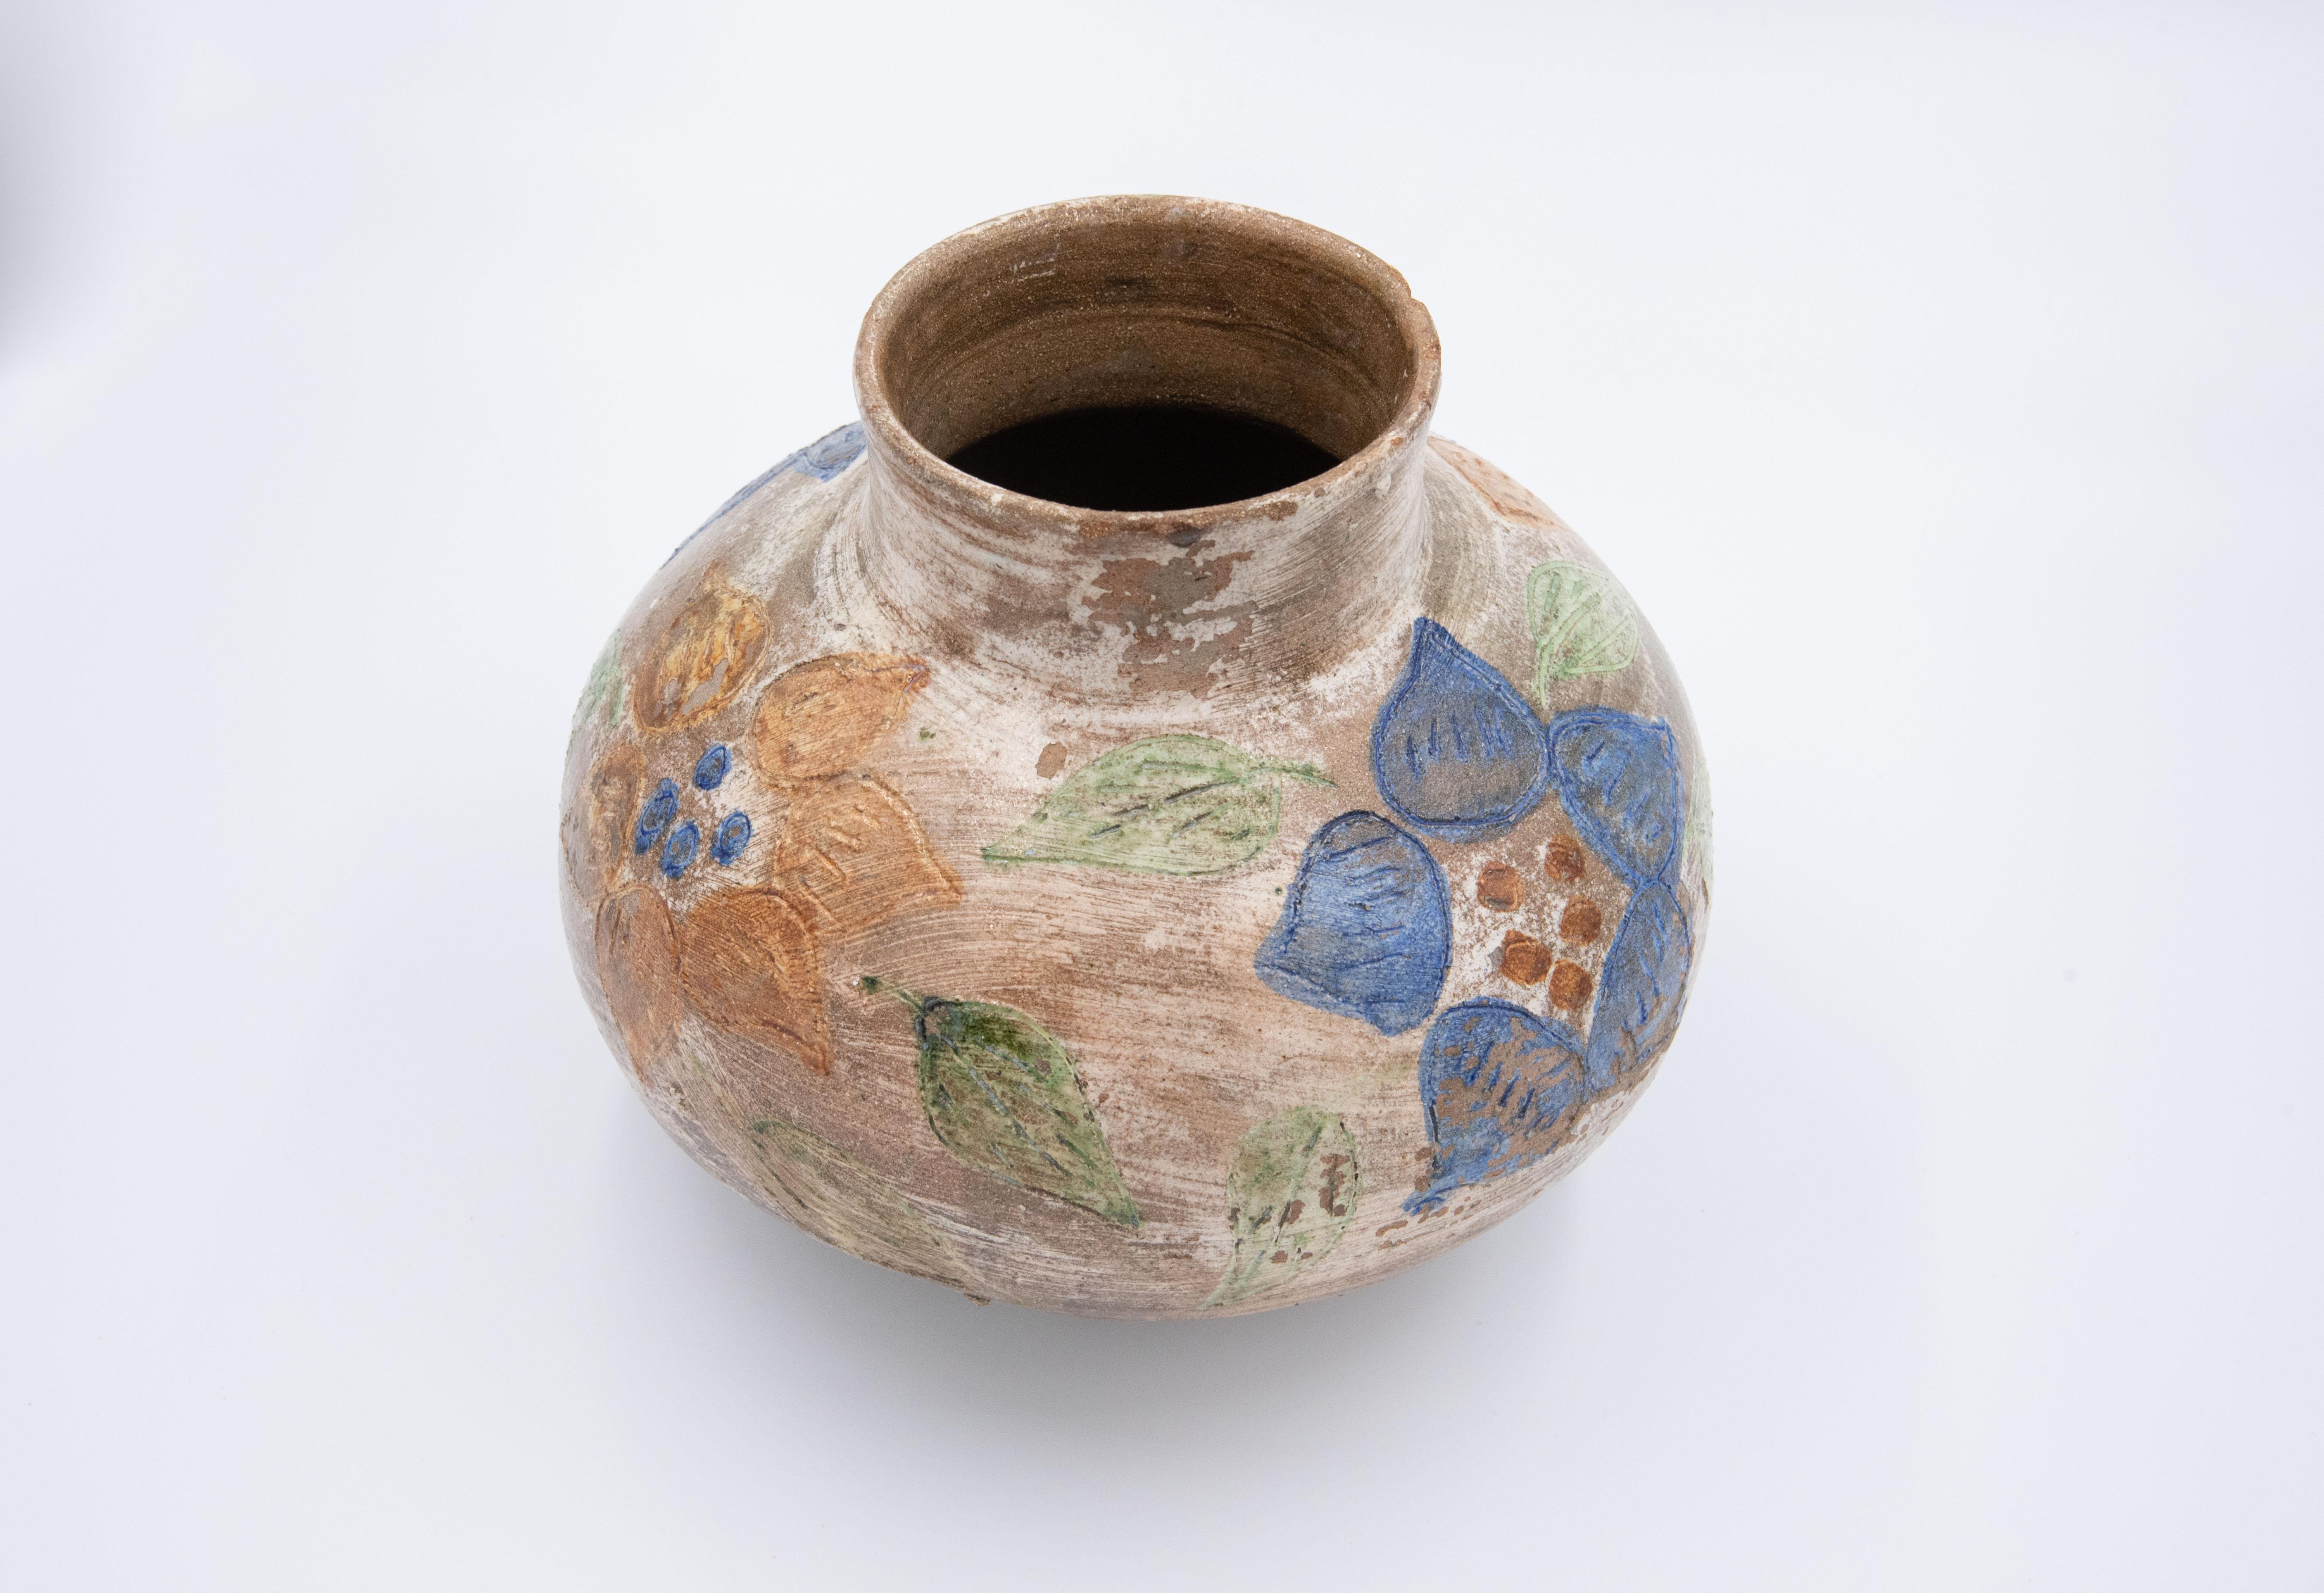 Dolores Porras Enríquez is widely known throughout Mexico and the world for being the creator of a technique rooted in the land of Oaxaca: pottery in natural color, glazed and decorated with floral motifs and colorful animals. 

In the early